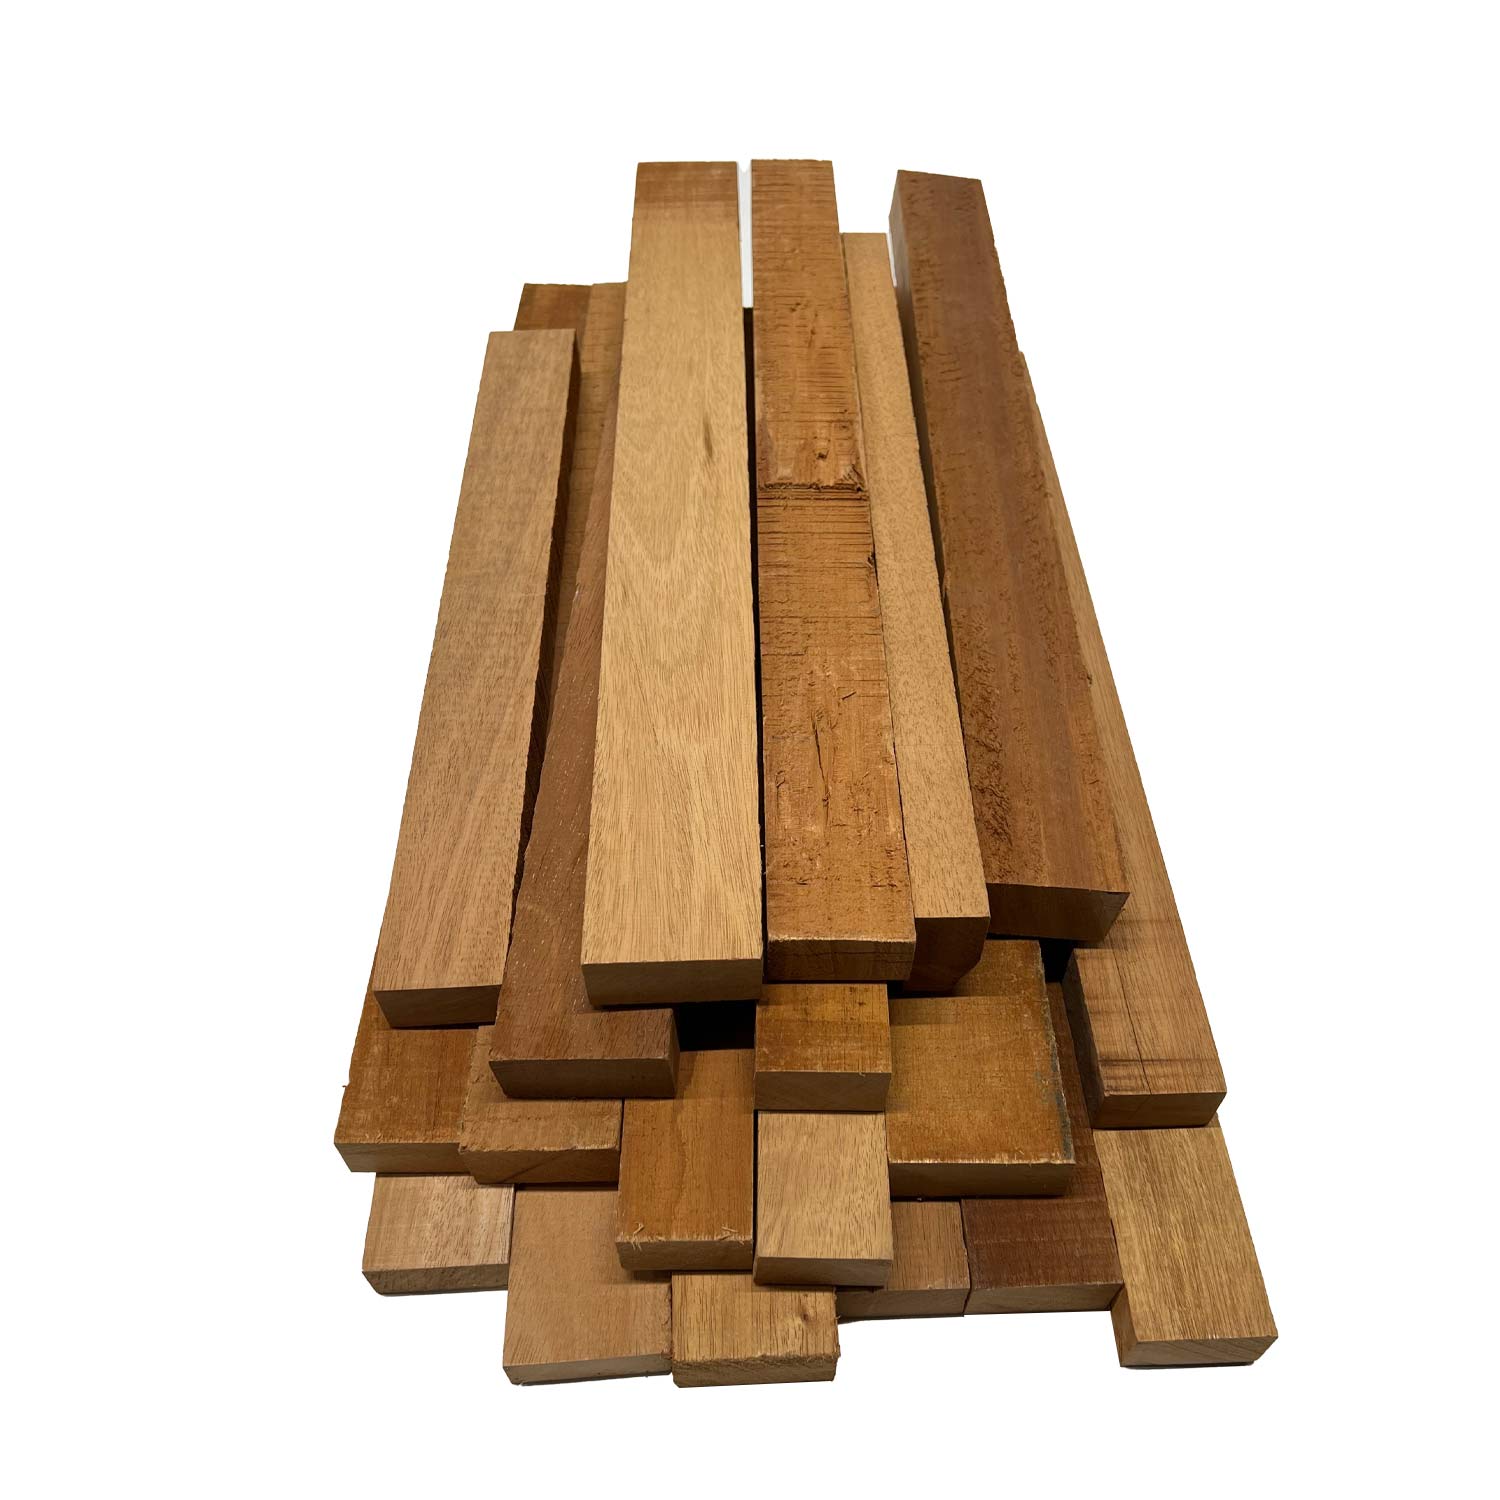 15 Pound Box of Honduran Mahogany Wood Cut-Offs - 3/4&quot;-1&quot; Thick pieces - Exotic Wood Zone - Buy online Across USA 